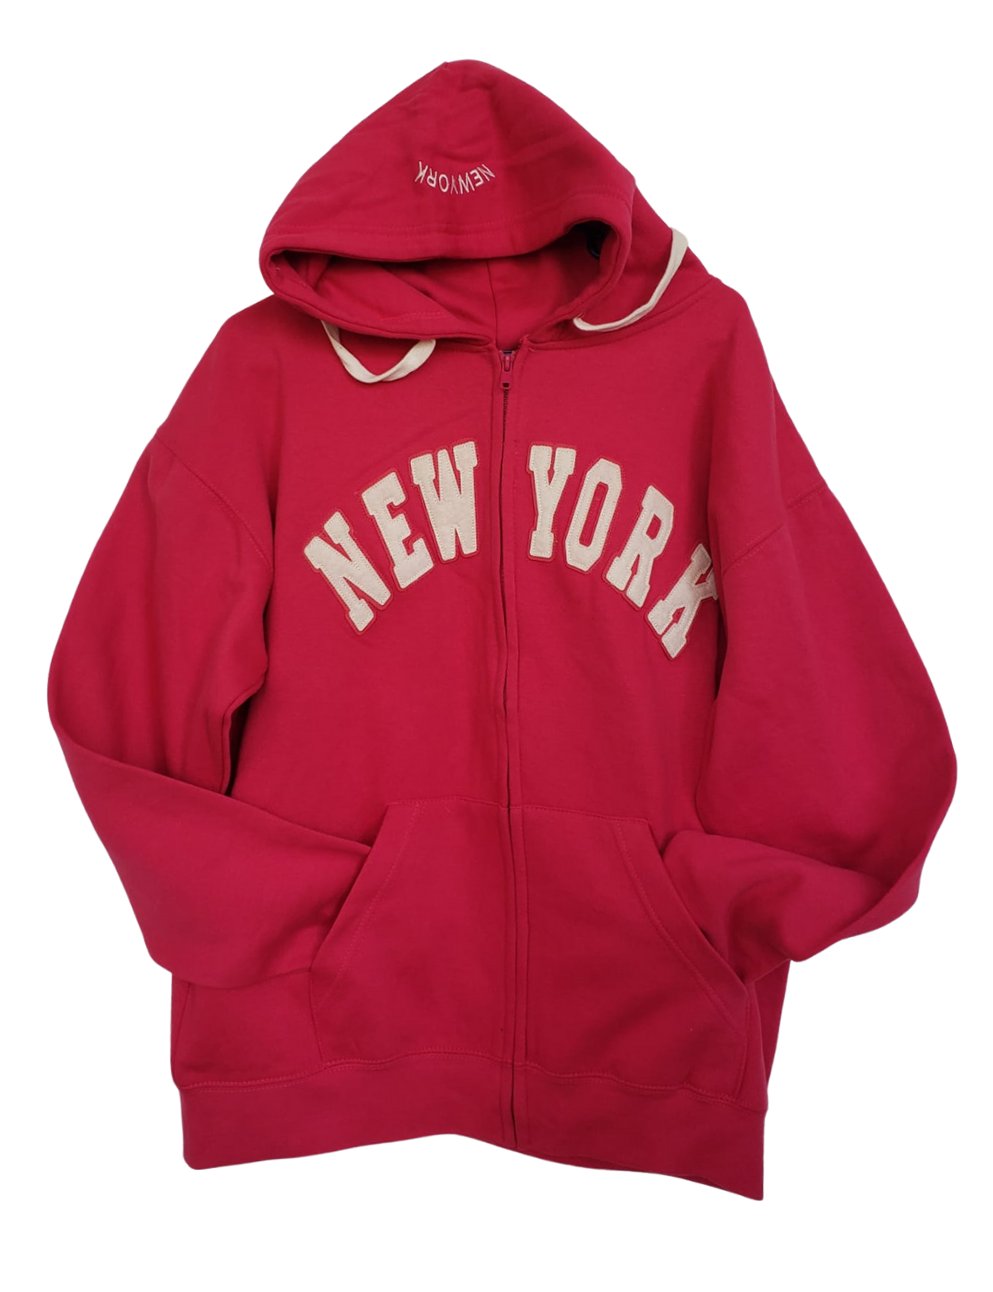 Only NY | NYC City of New York Hoodie, Vintage Black/Natural / S